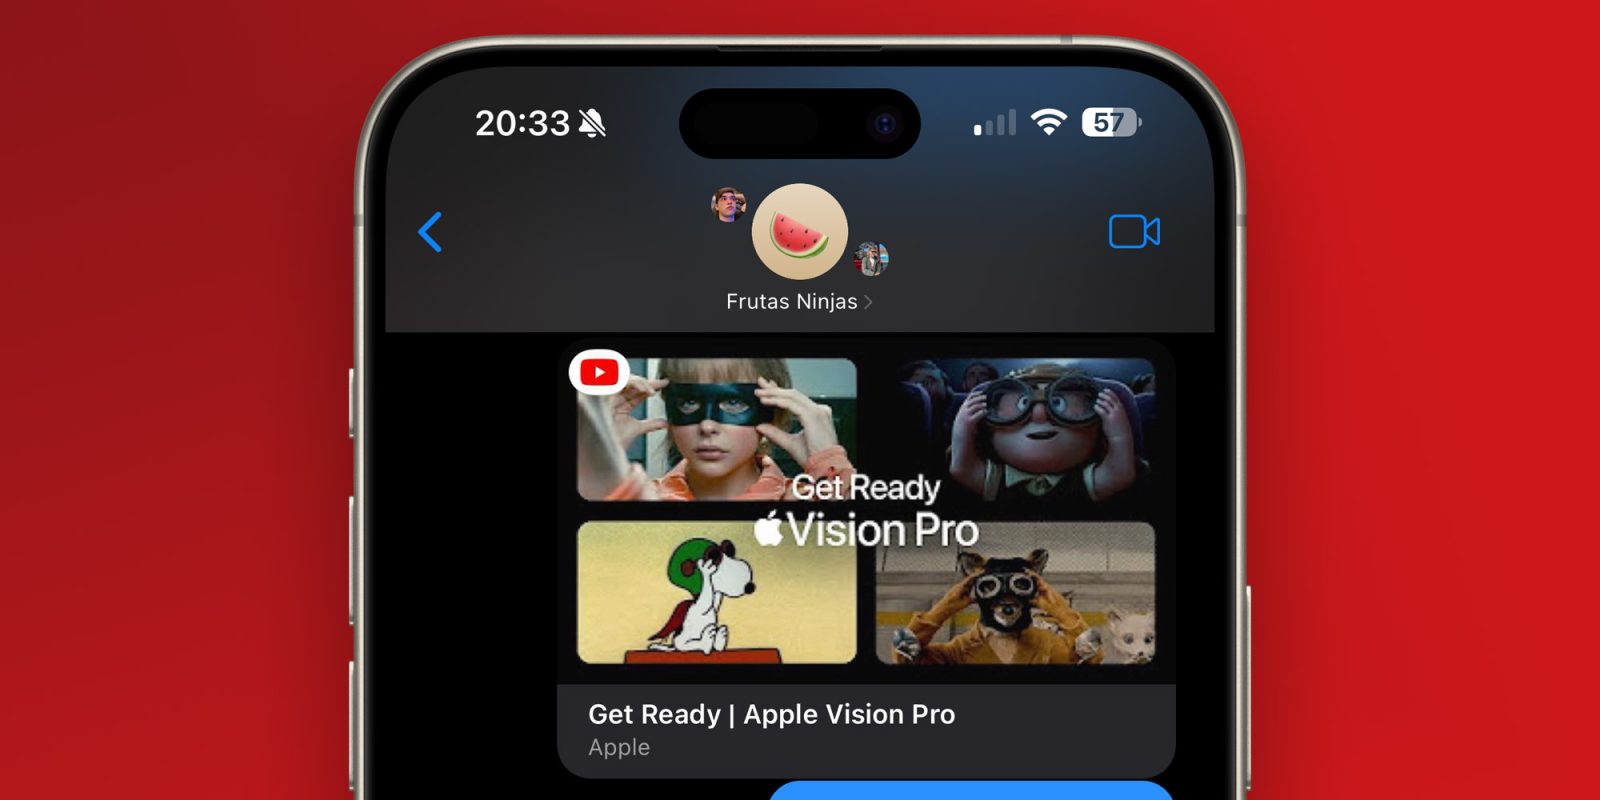 Youtube discontinues its imessage mini app for iphone and ipad users